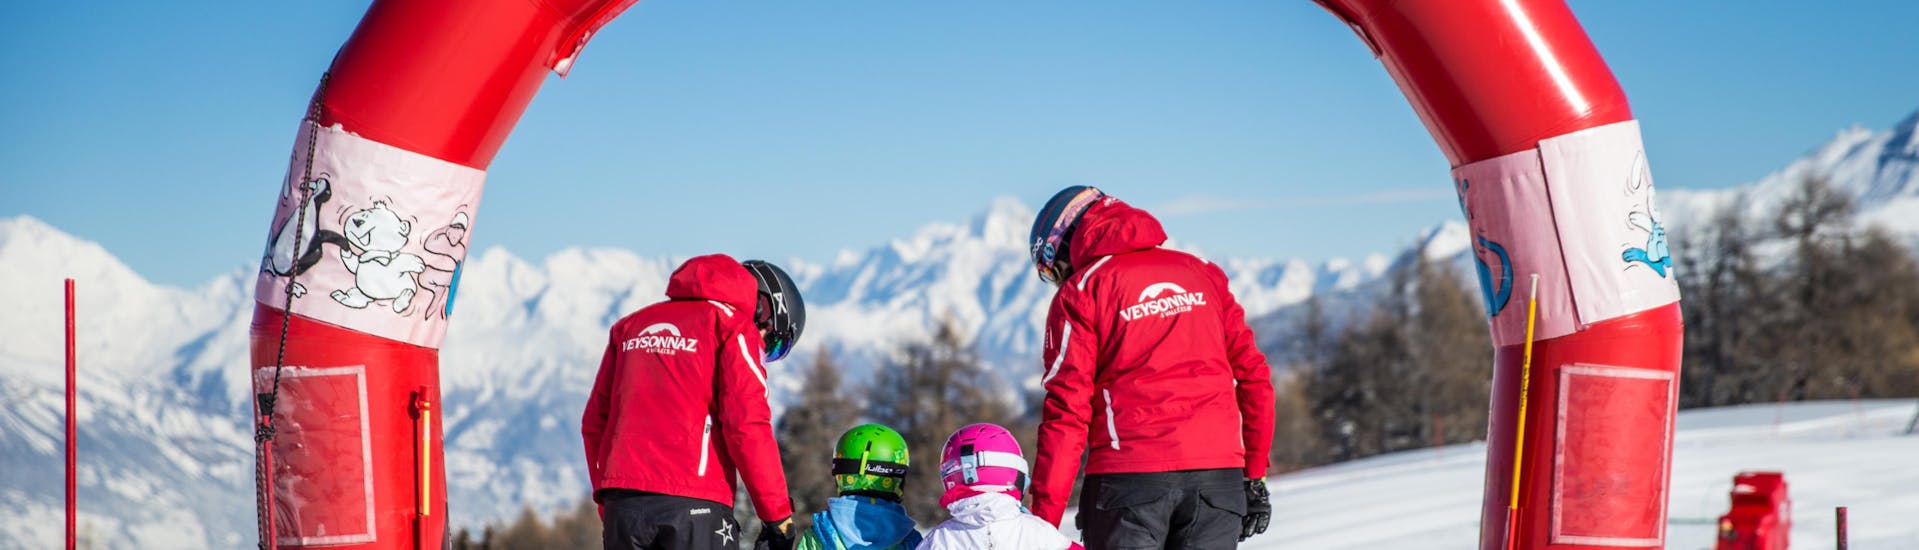 Two instructors from Swiss Ski School Veyzonnaz help young children to take their first steps on skis during a private ski lesson for kids from 2 and a half to 5 years old.